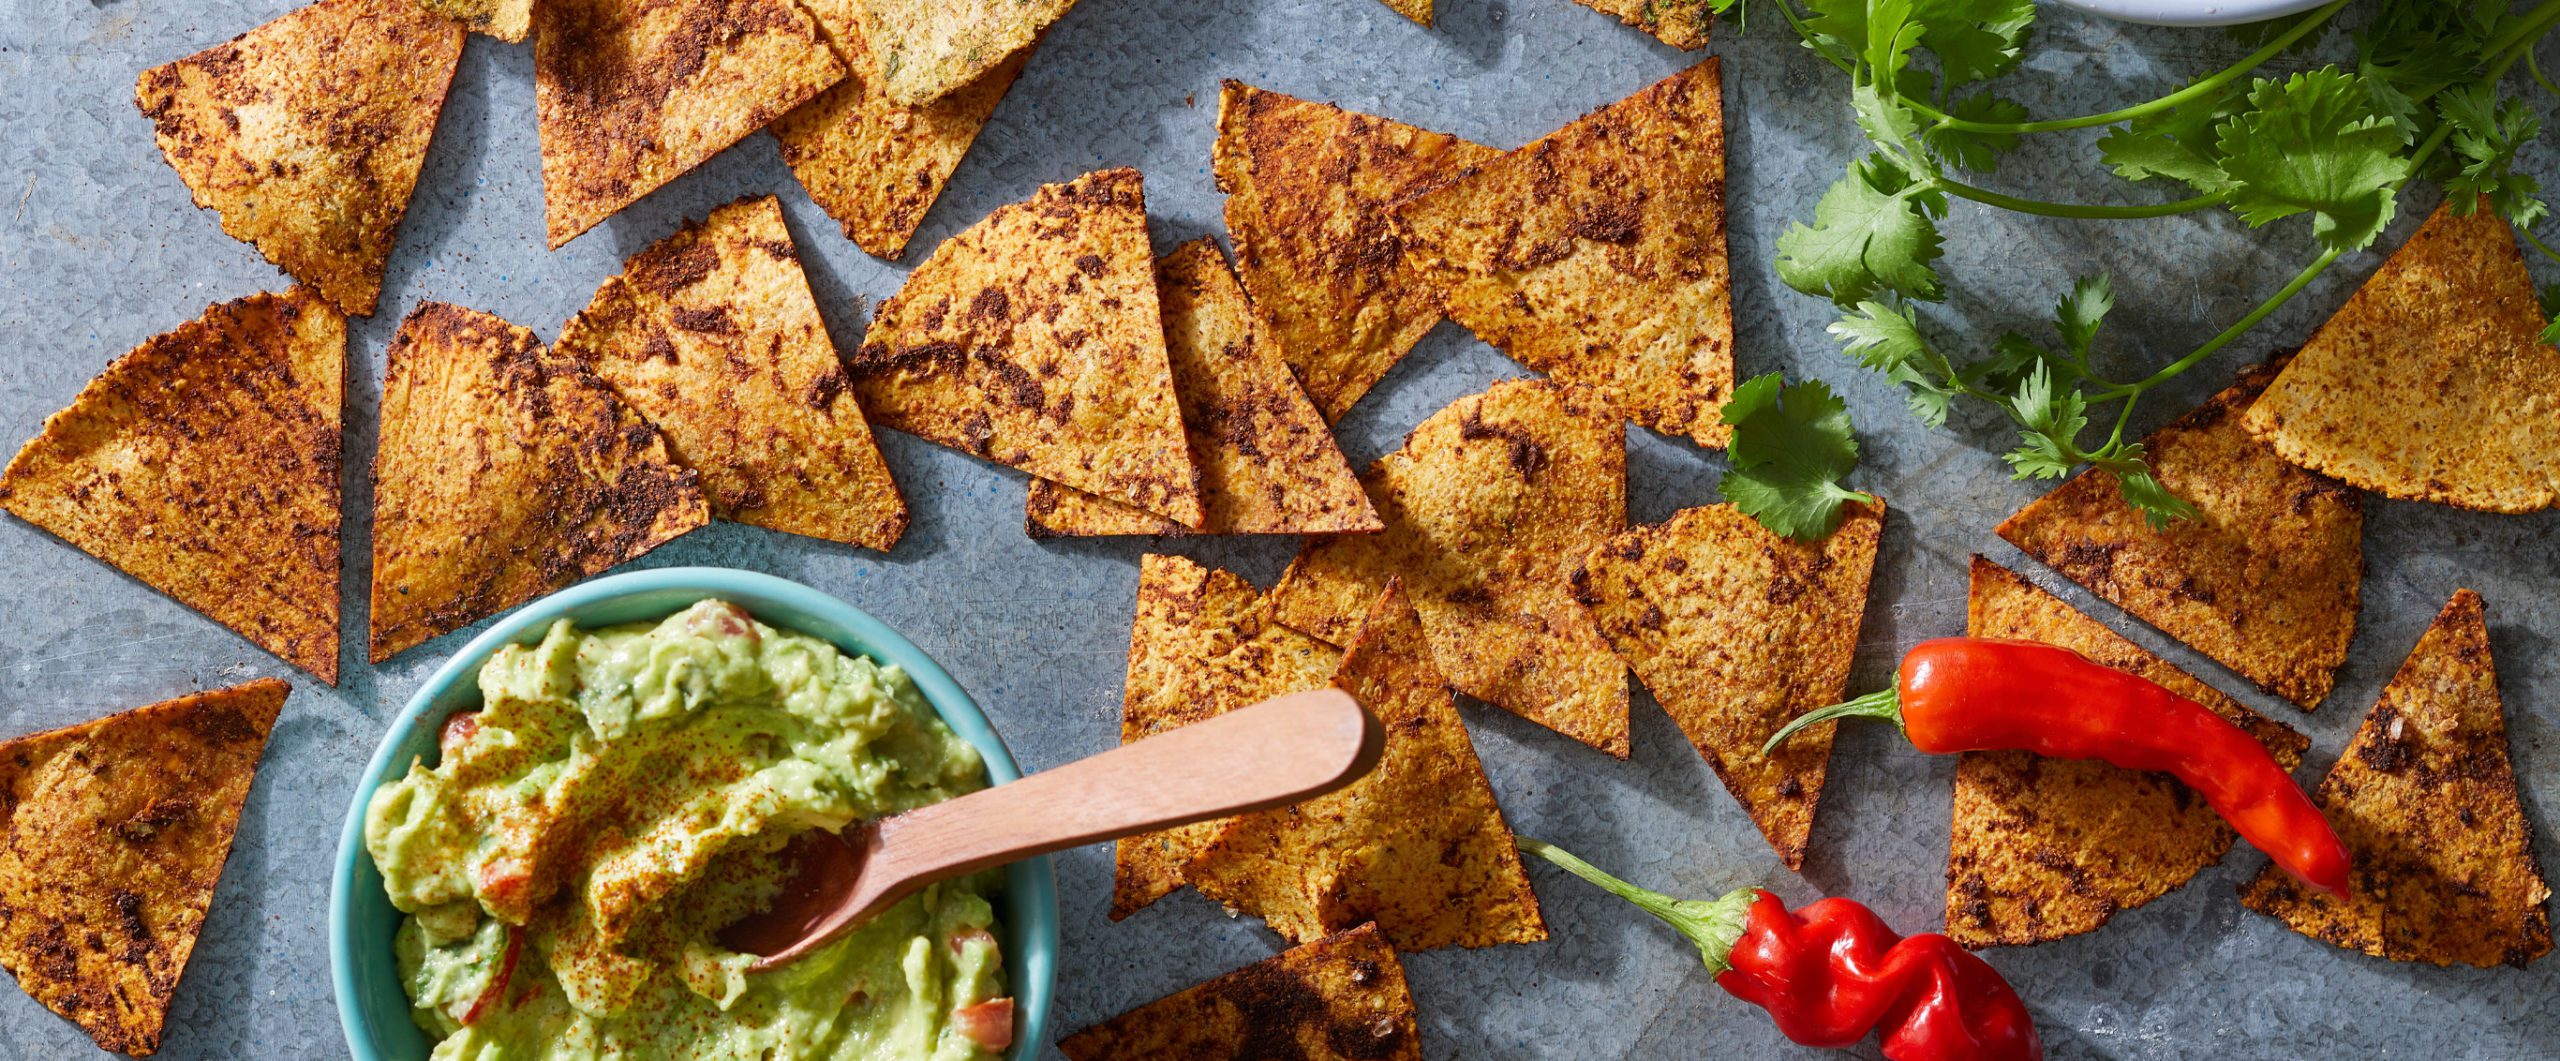 taco-spiced seasoned tortilla Chips - snacks for working from home